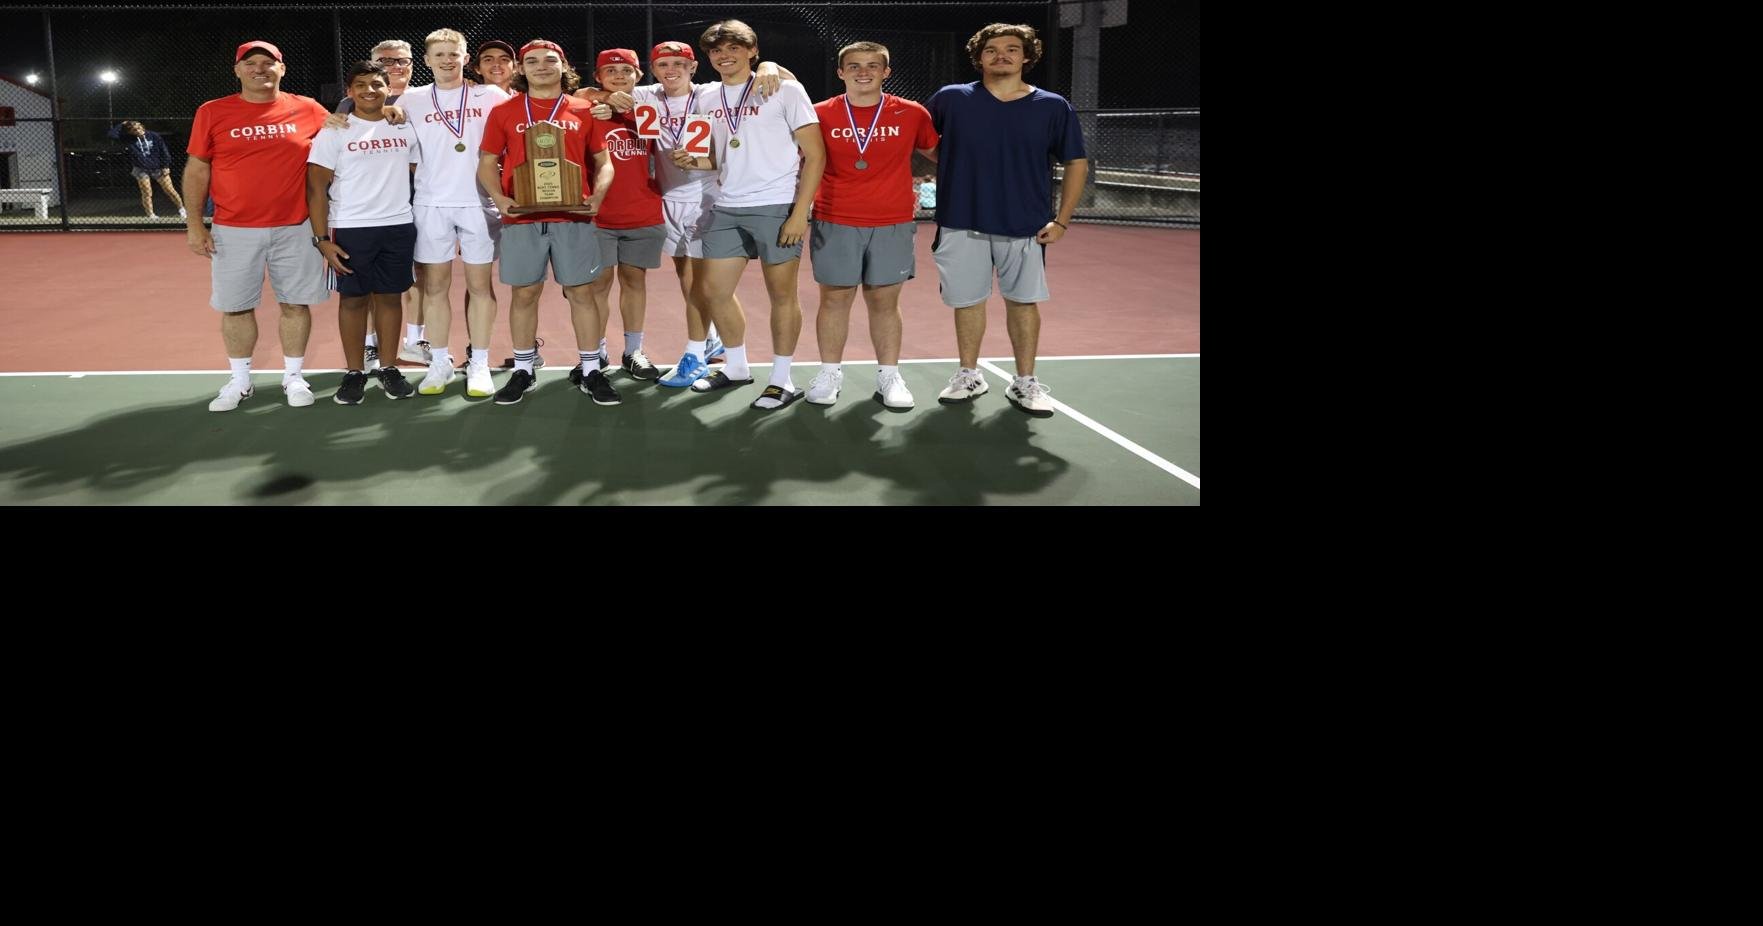 Redhounds Capture 22nd Straight Region Crown Quinn Maguet Wins Singles Title Hillball Capture 4064